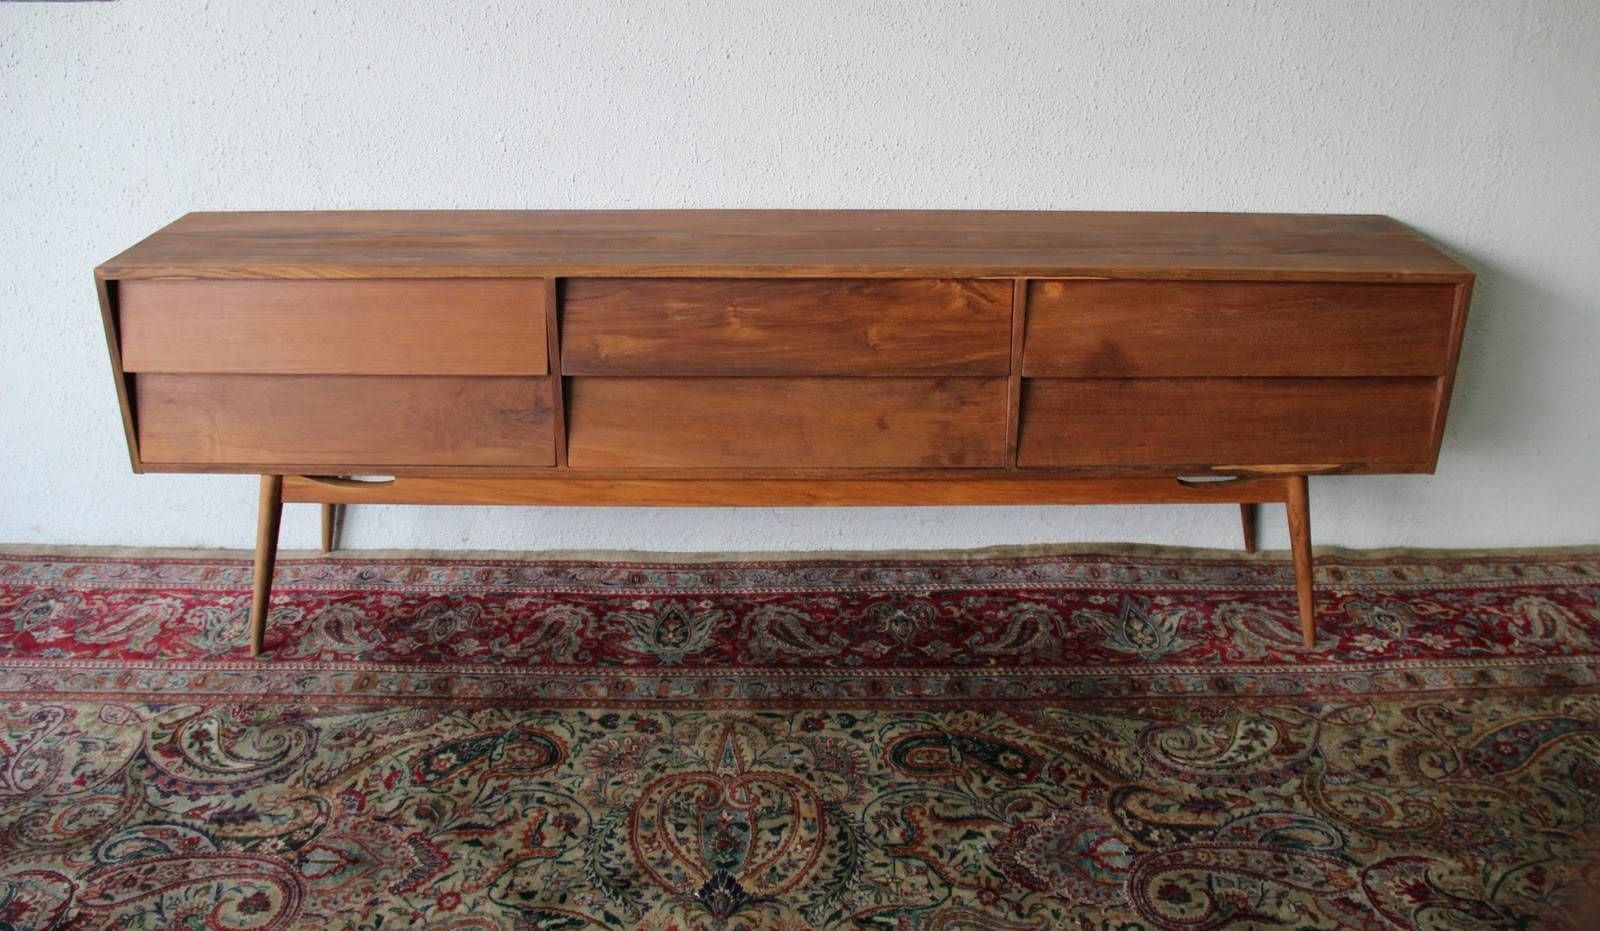 Vintage Sideboards – Second Charm Midcentury Modern Collections For Retro Sideboards (View 15 of 30)